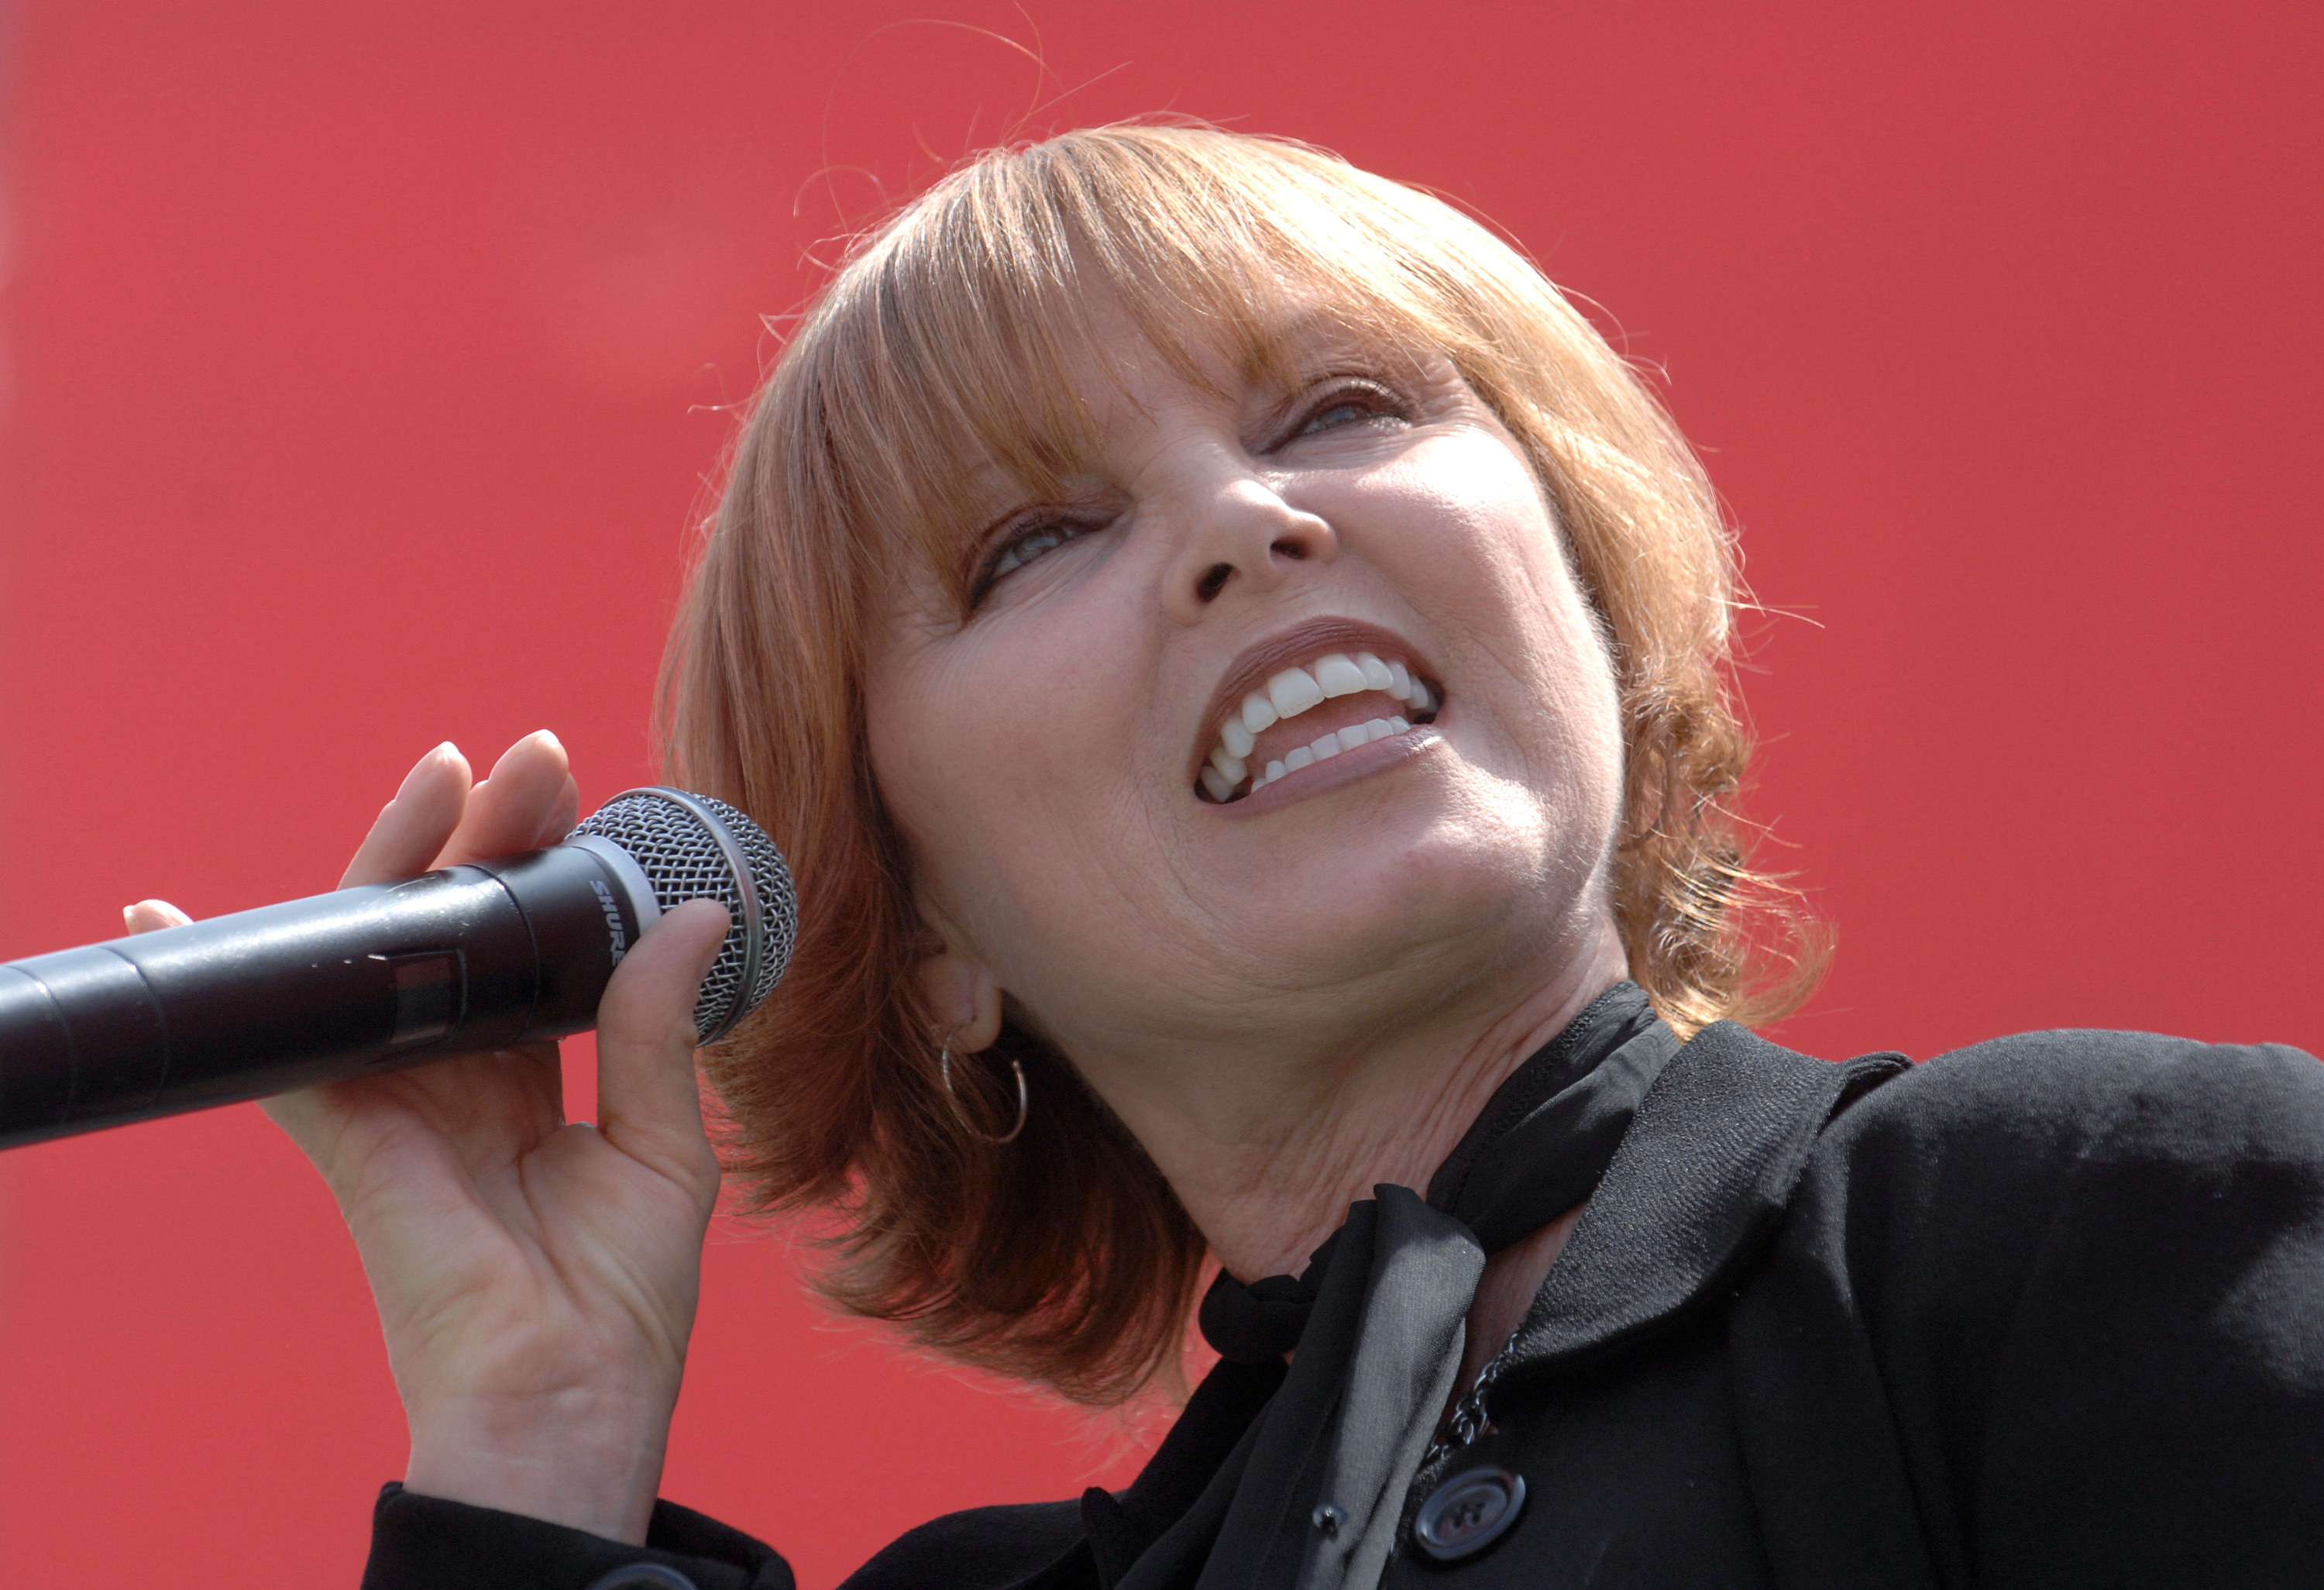 Pat Benatar won't perform 'Hit Me with Your Best Shot' anymore